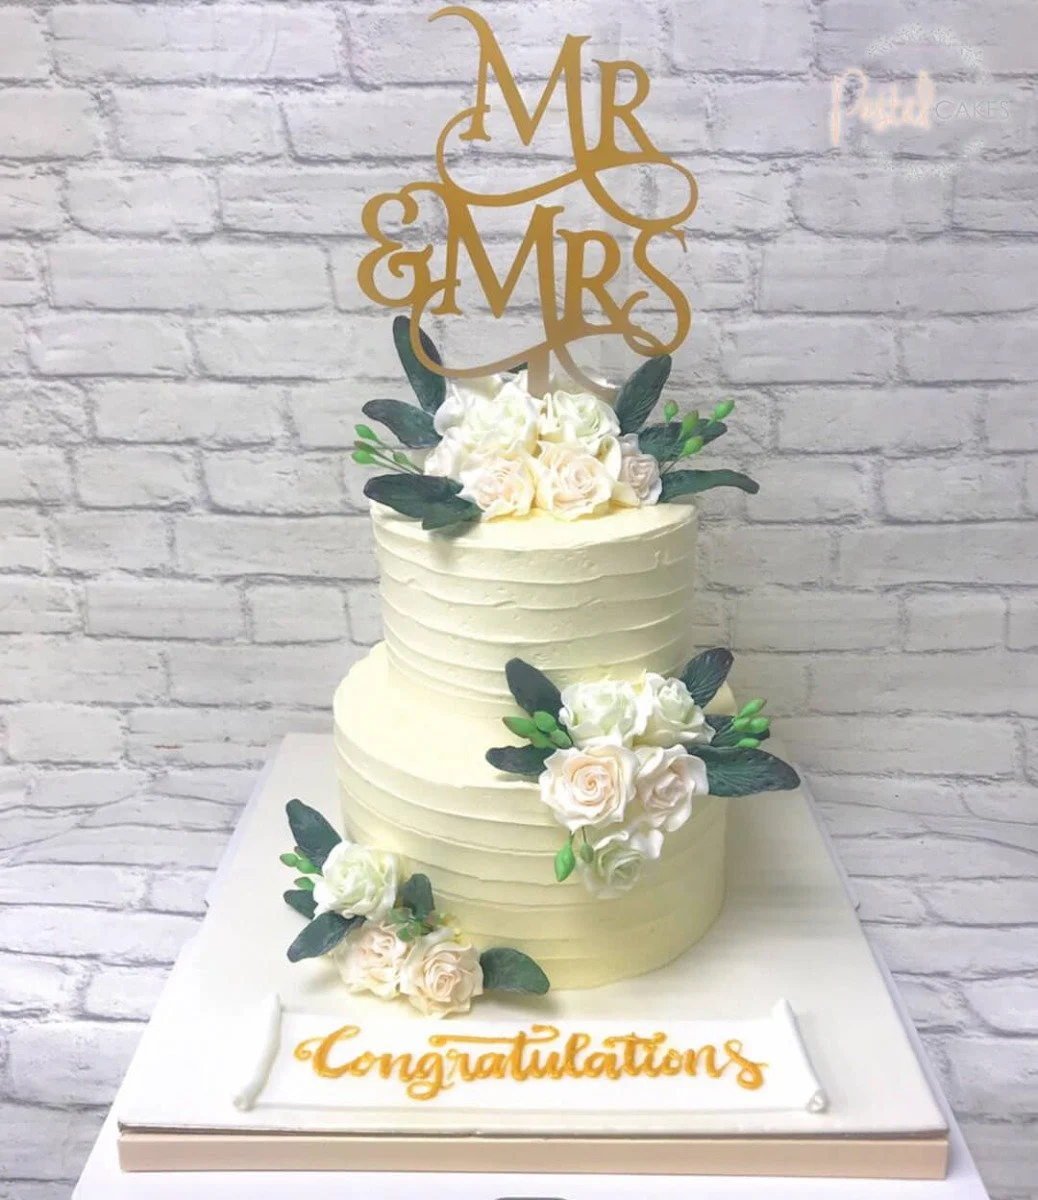 Mr & Mrs Cake By Pastel Cakes